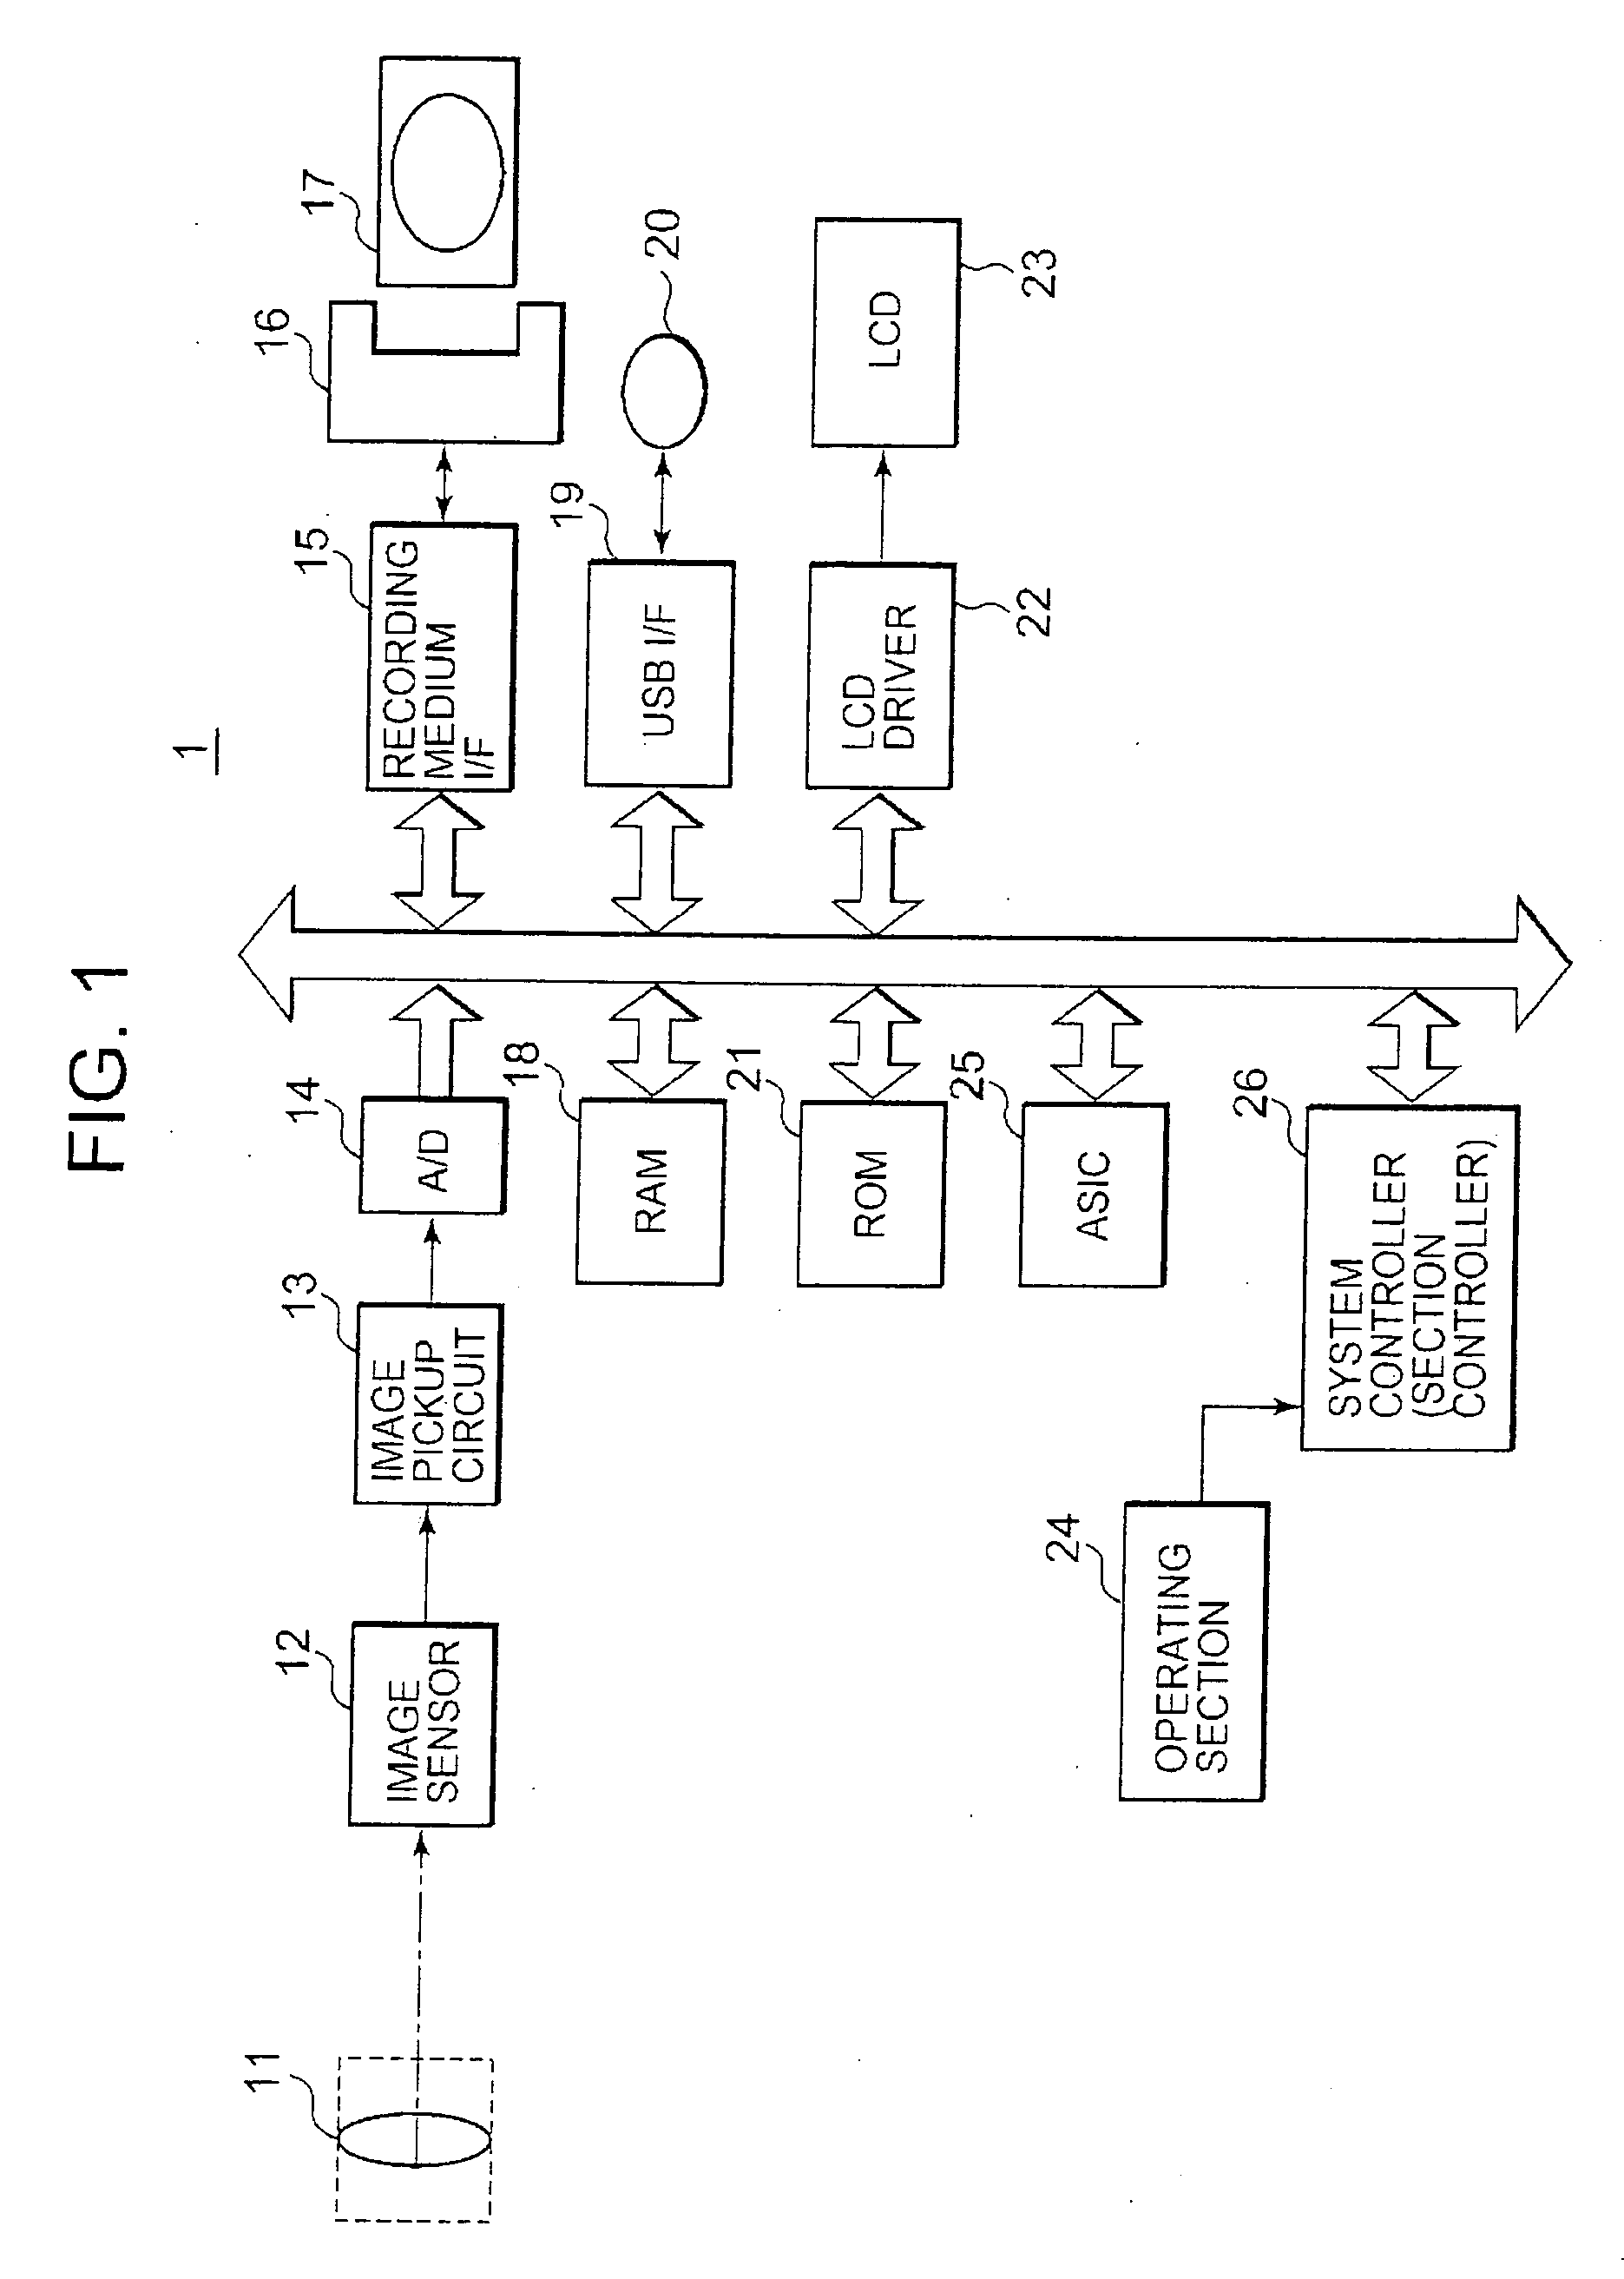 Image data selecting method and image data processing device